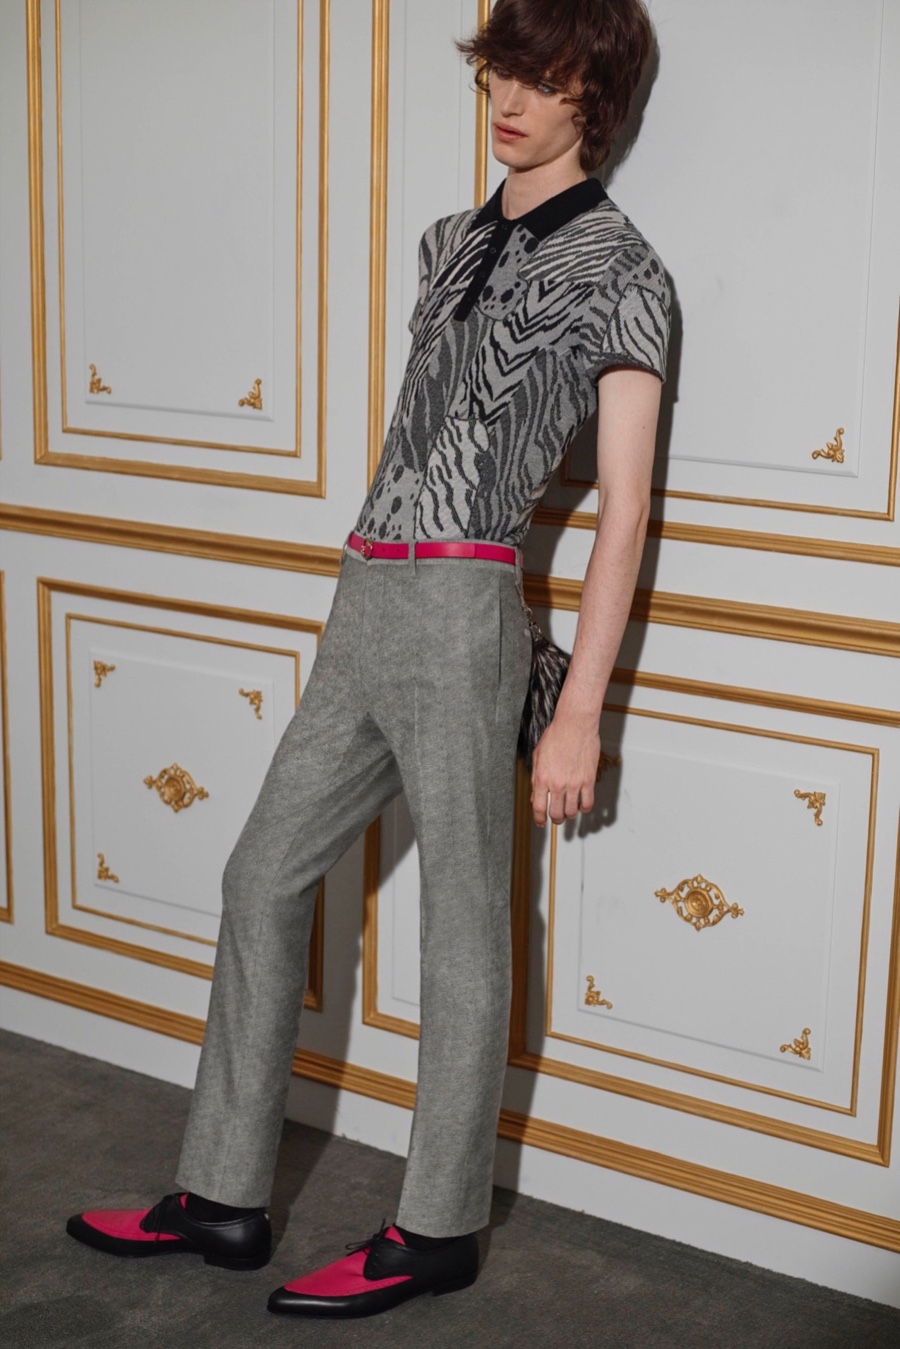 Roberto Cavalli Spring/Summer 2016 Menswear Collection Delivers Glam Rock Styles